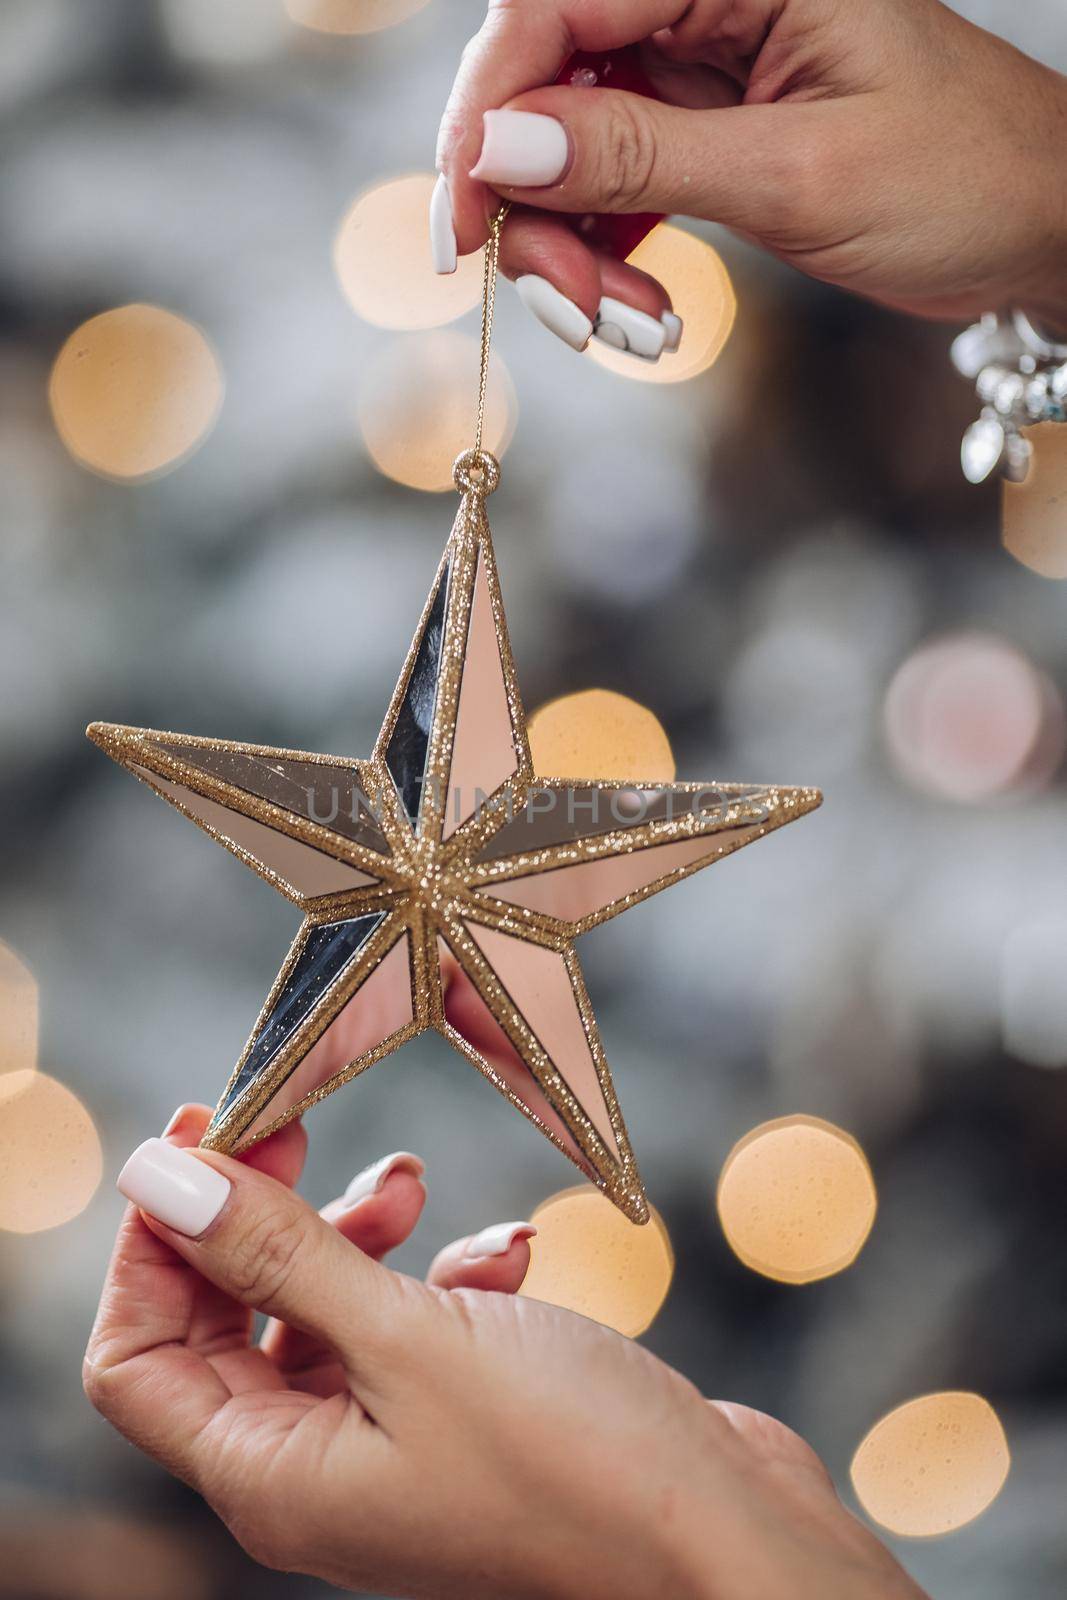 Close up of woman with toy glass decorative star in hands. New Year eve concept